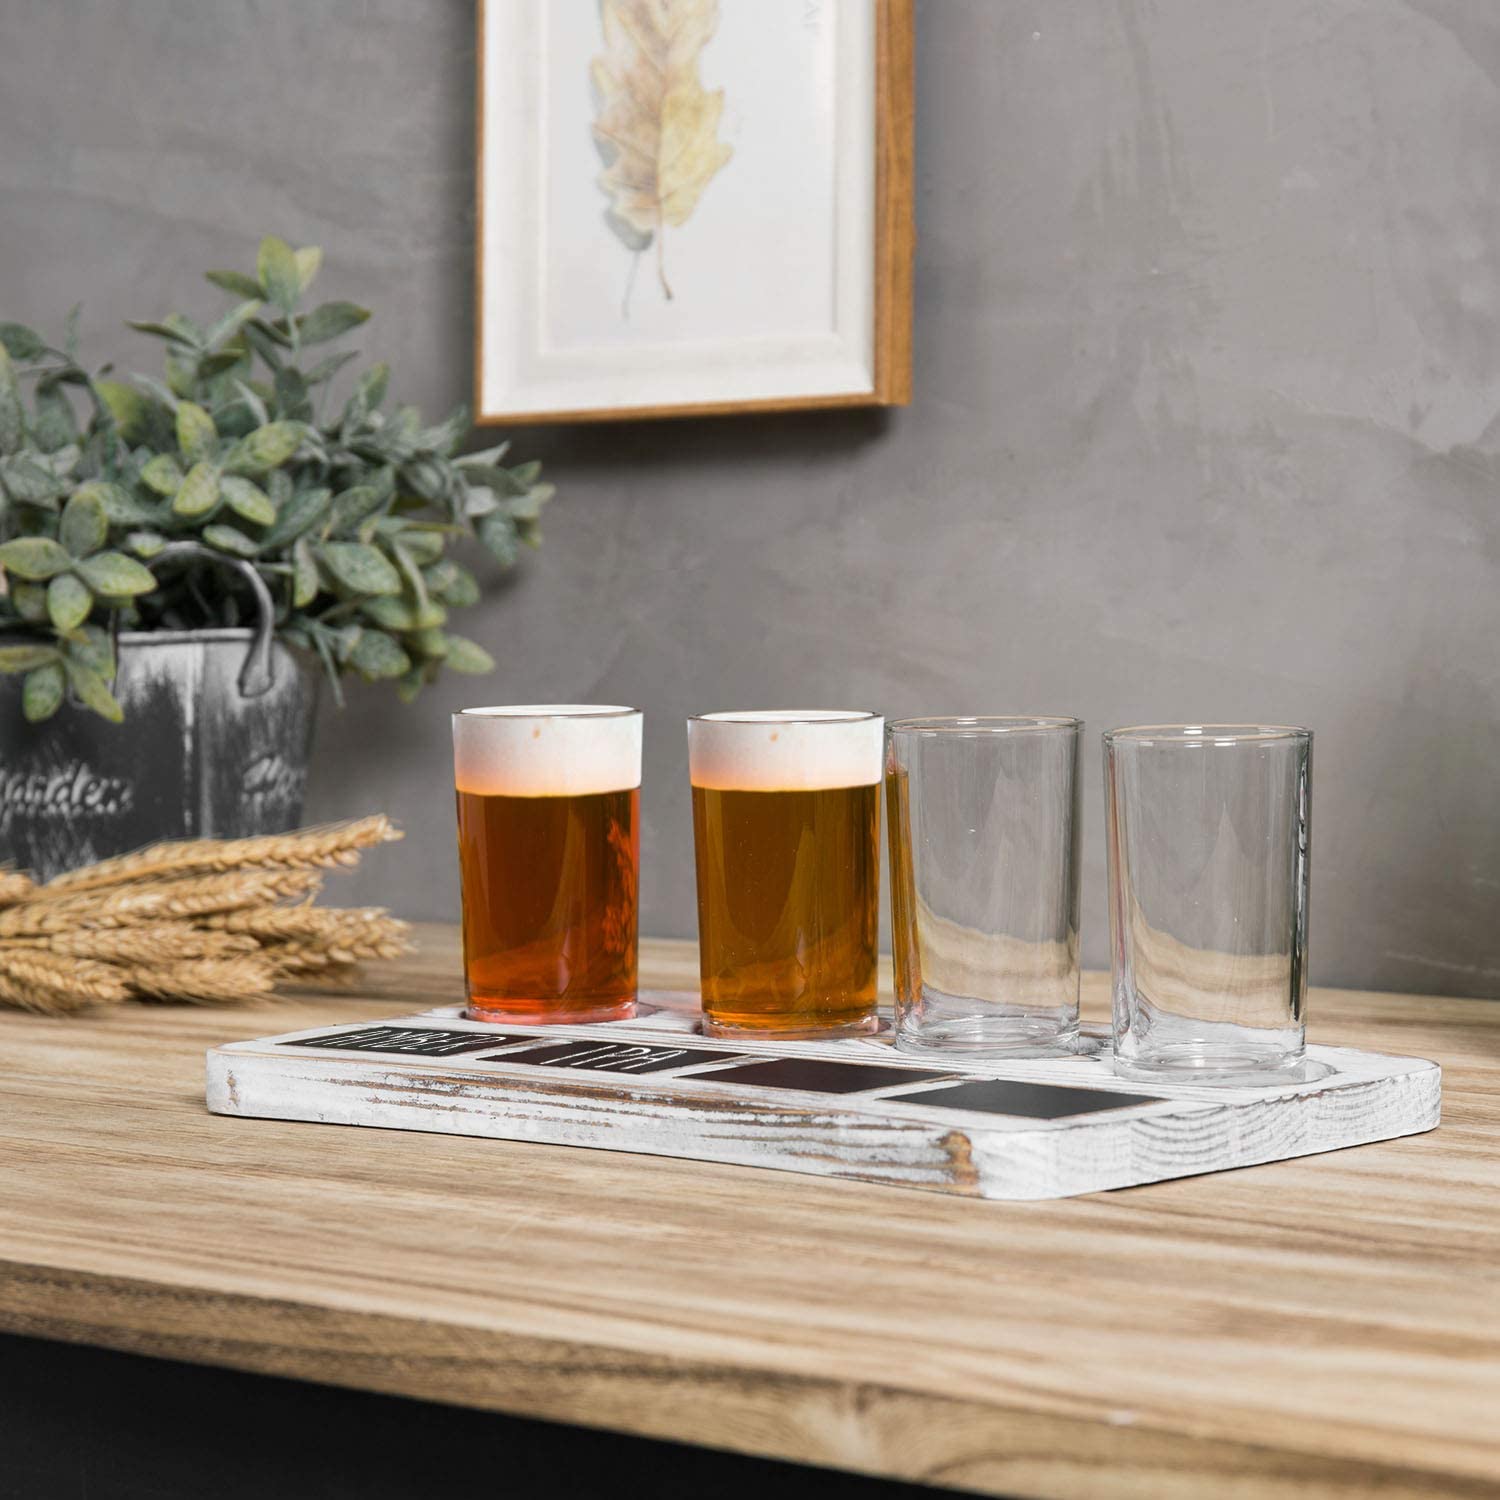 MyGift 4-Glass Whitewashed Wood Beer Flight Sampler Serving Tray with Chalkboard Labels - image 5 of 7